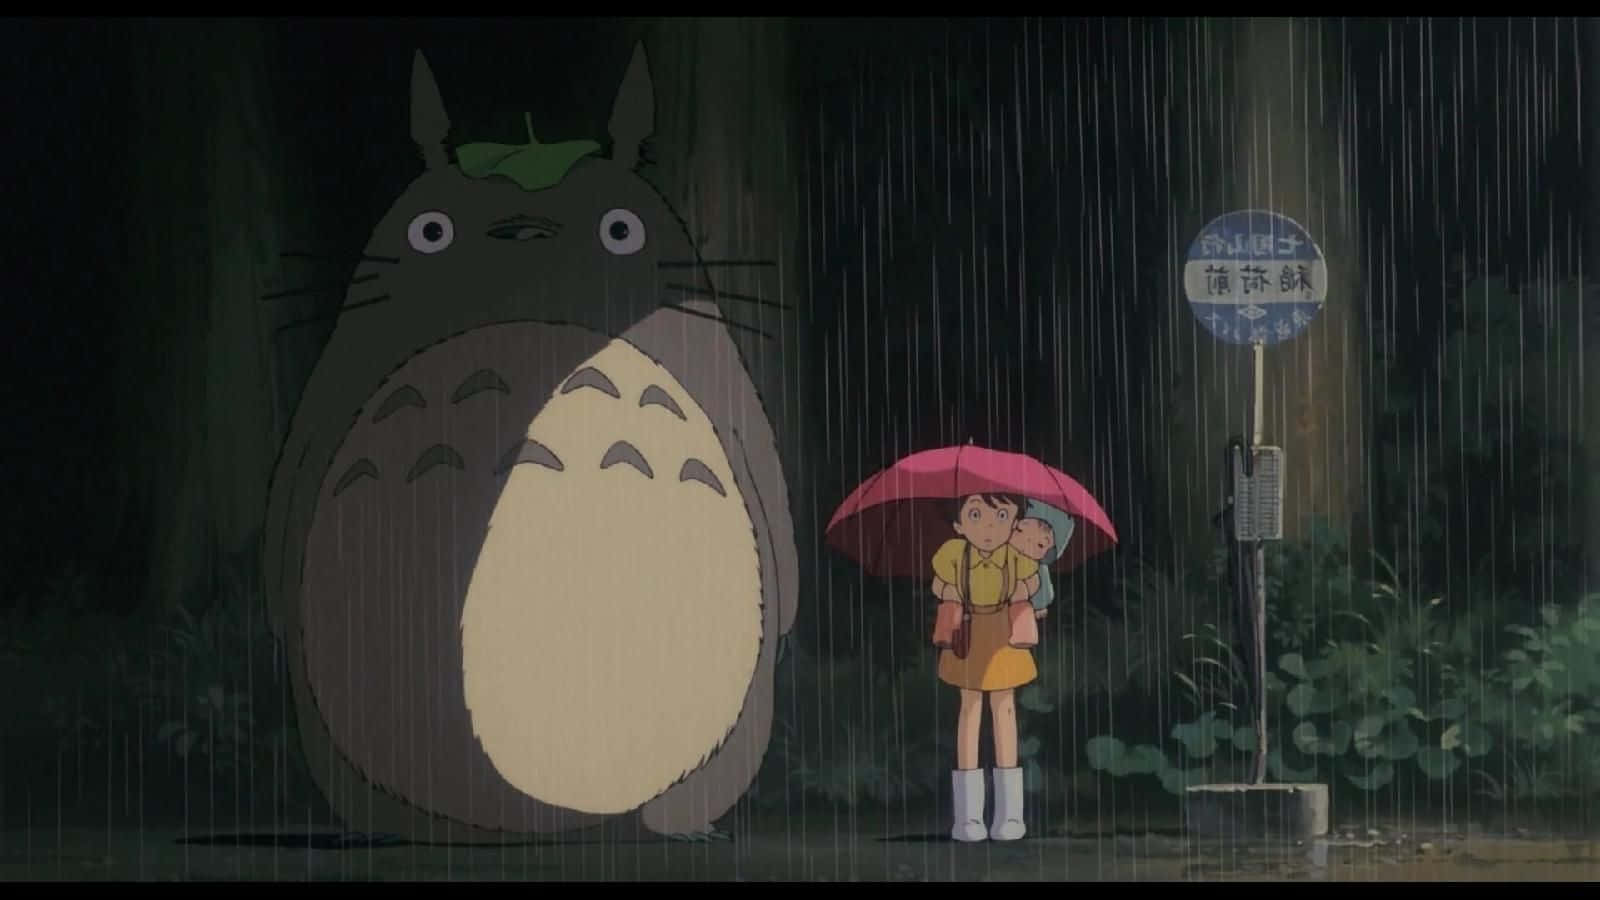 "My Neighbor Totoro - Walk with me through the magical forest."